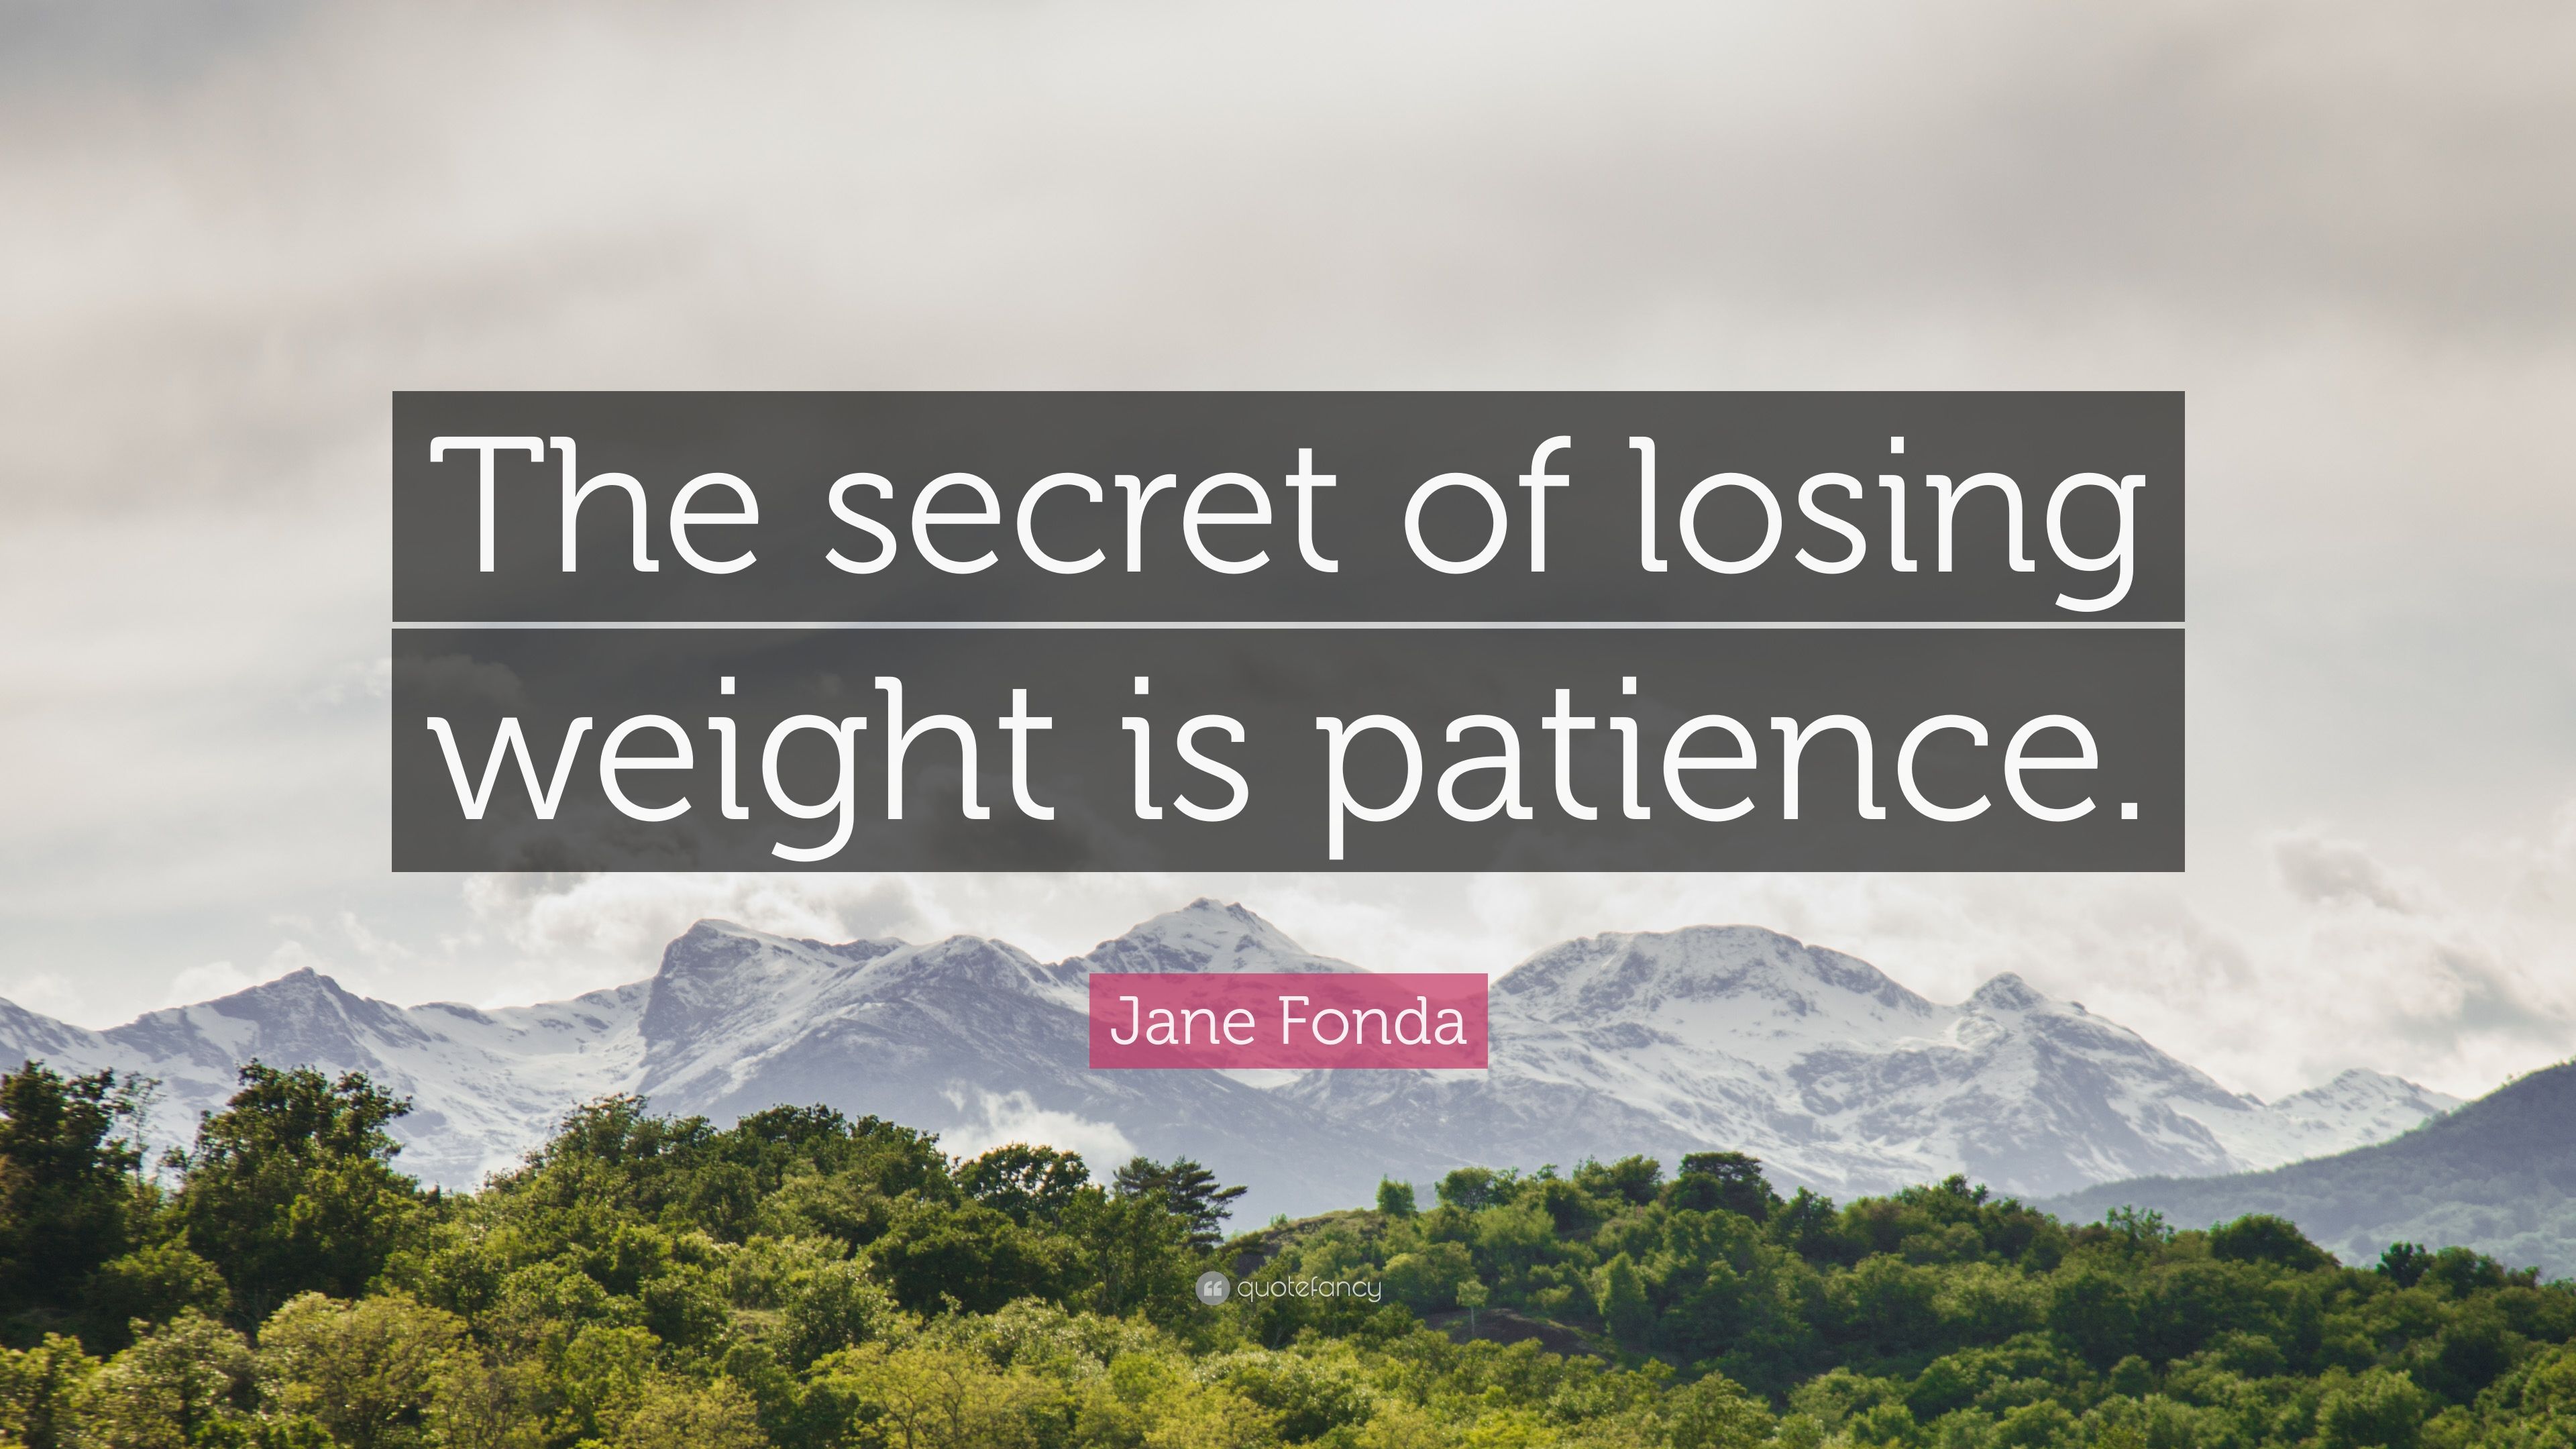 Jane Fonda Quote: “The secret of losing weight is patience.” 12